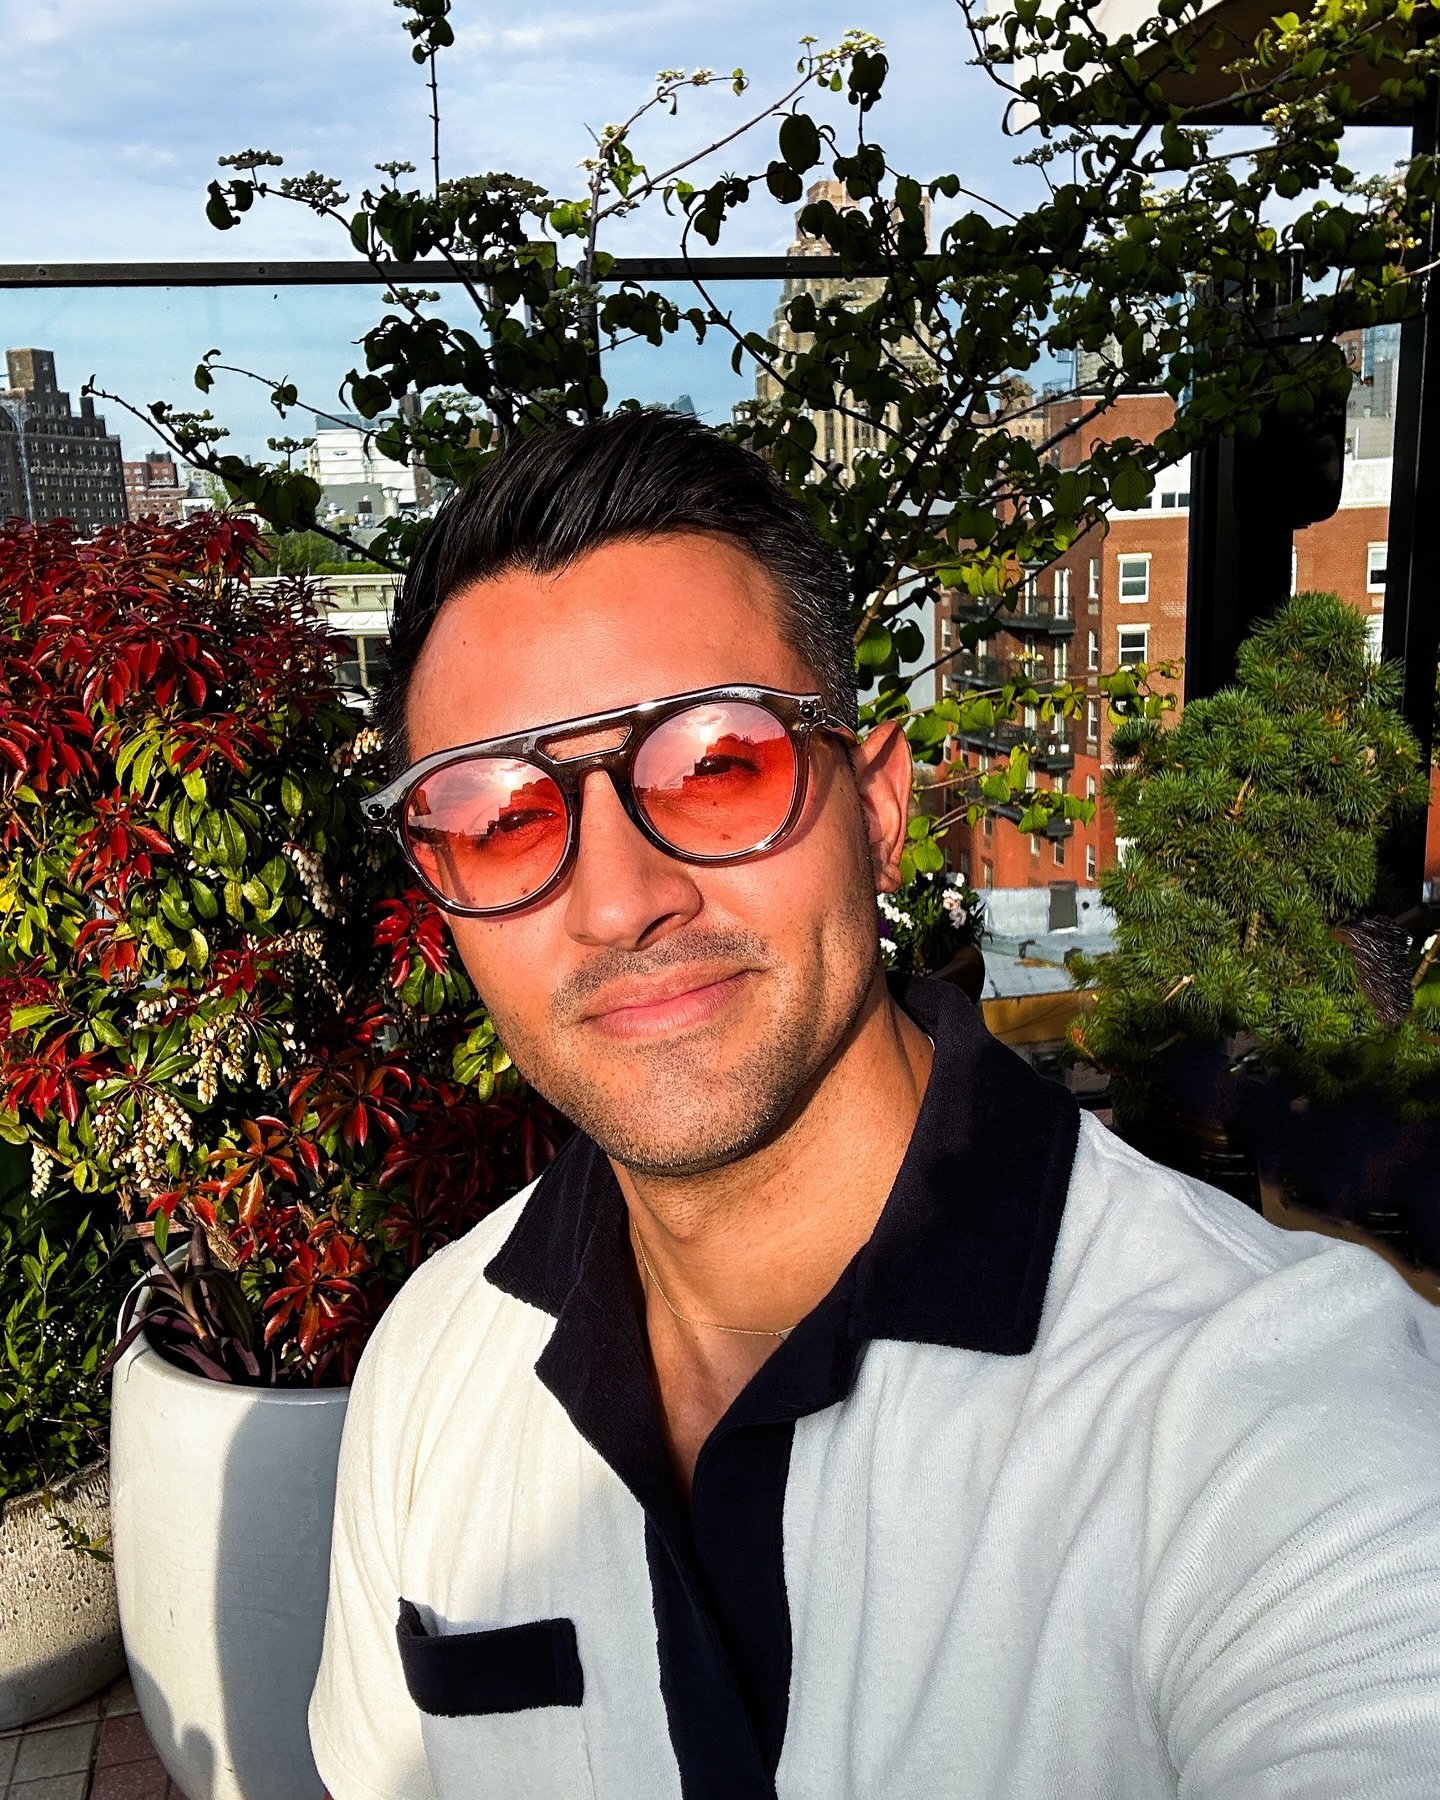 Sunny disposition. 🌇 #NYC #DiegoDowntown